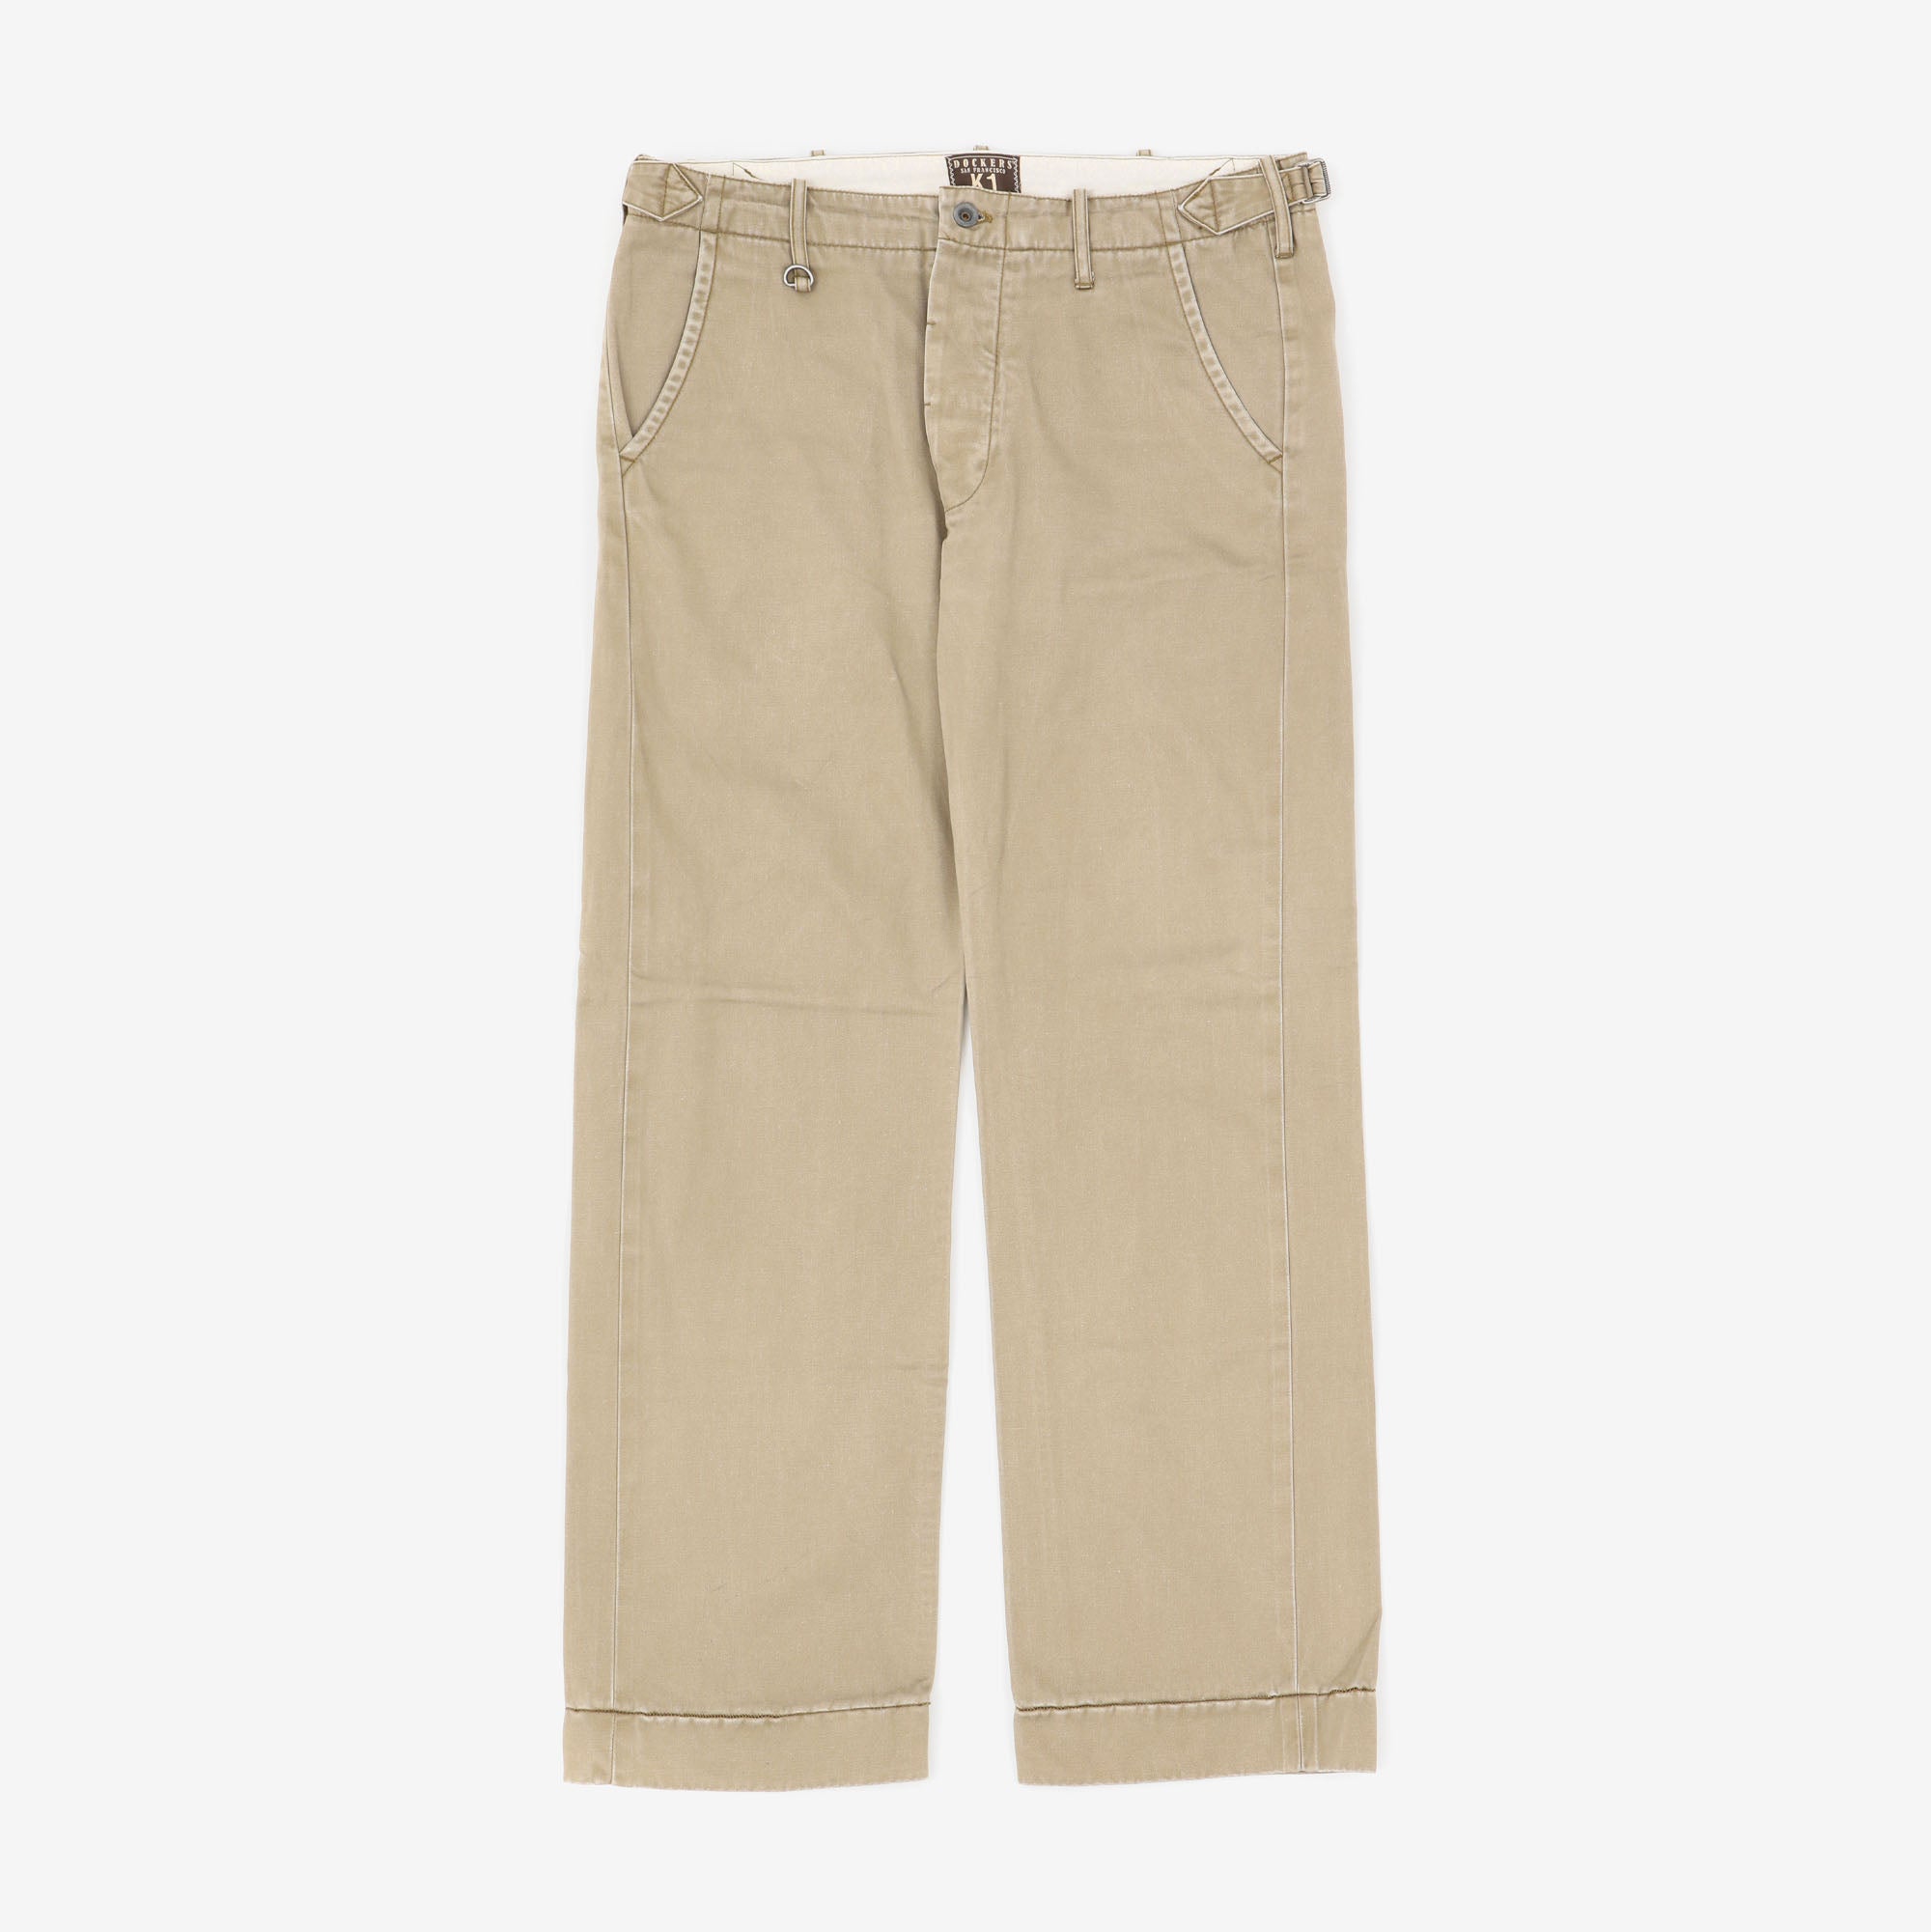 K-1 Limited Edition Chinos